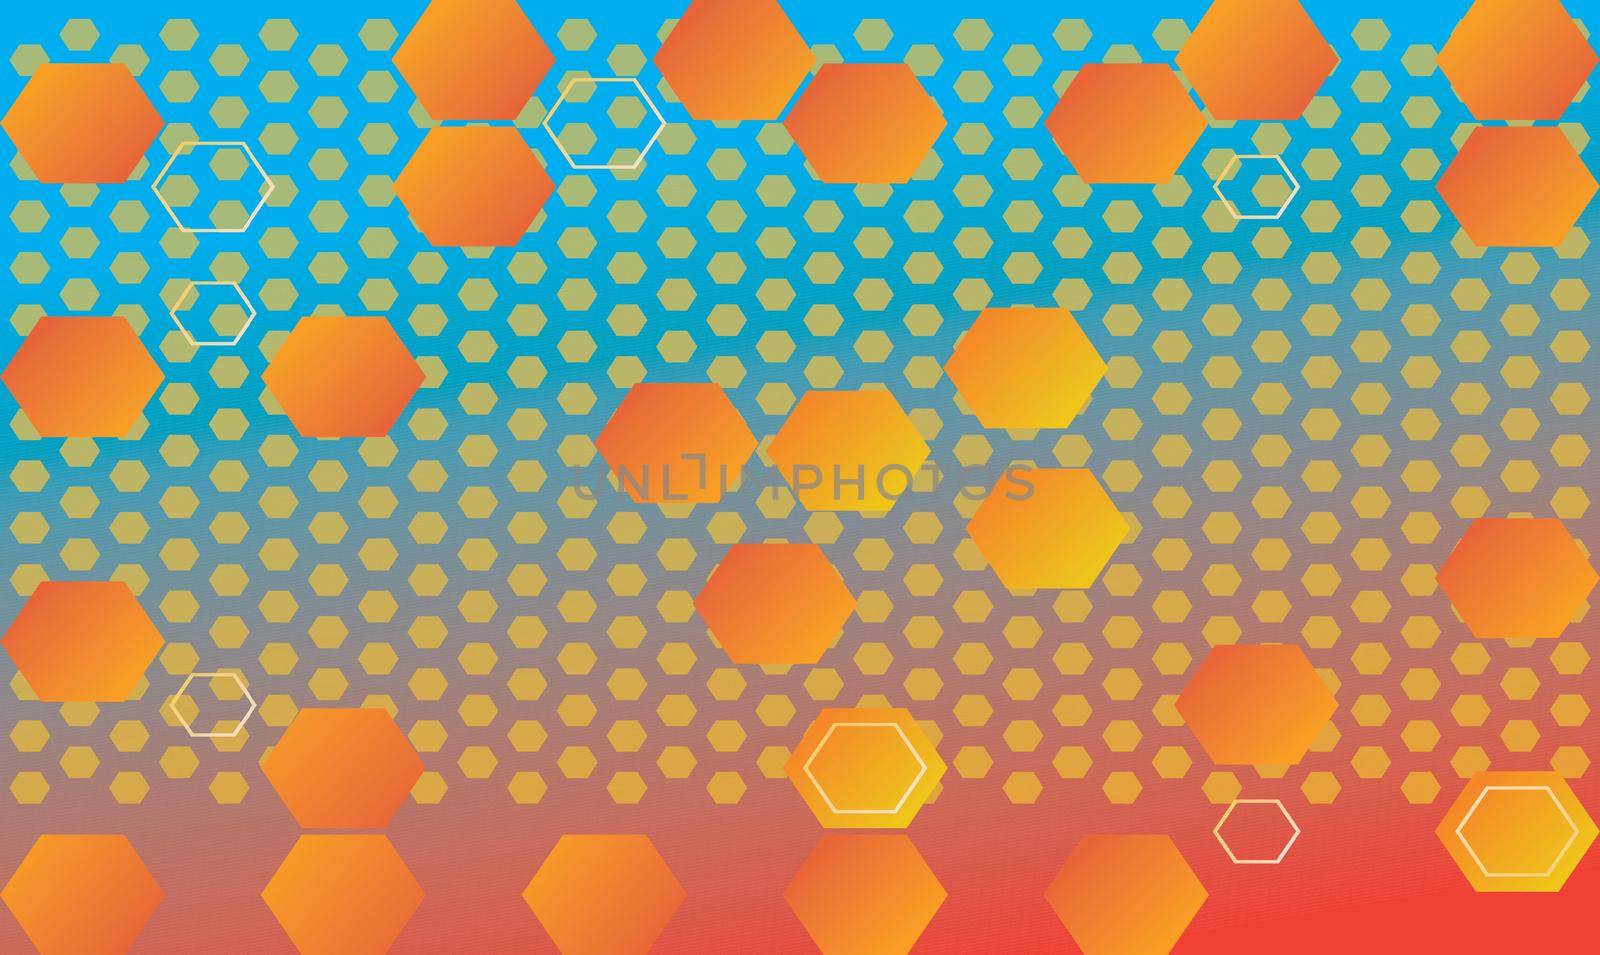 small hexagon on circle dotted background by aanavcreationsplus